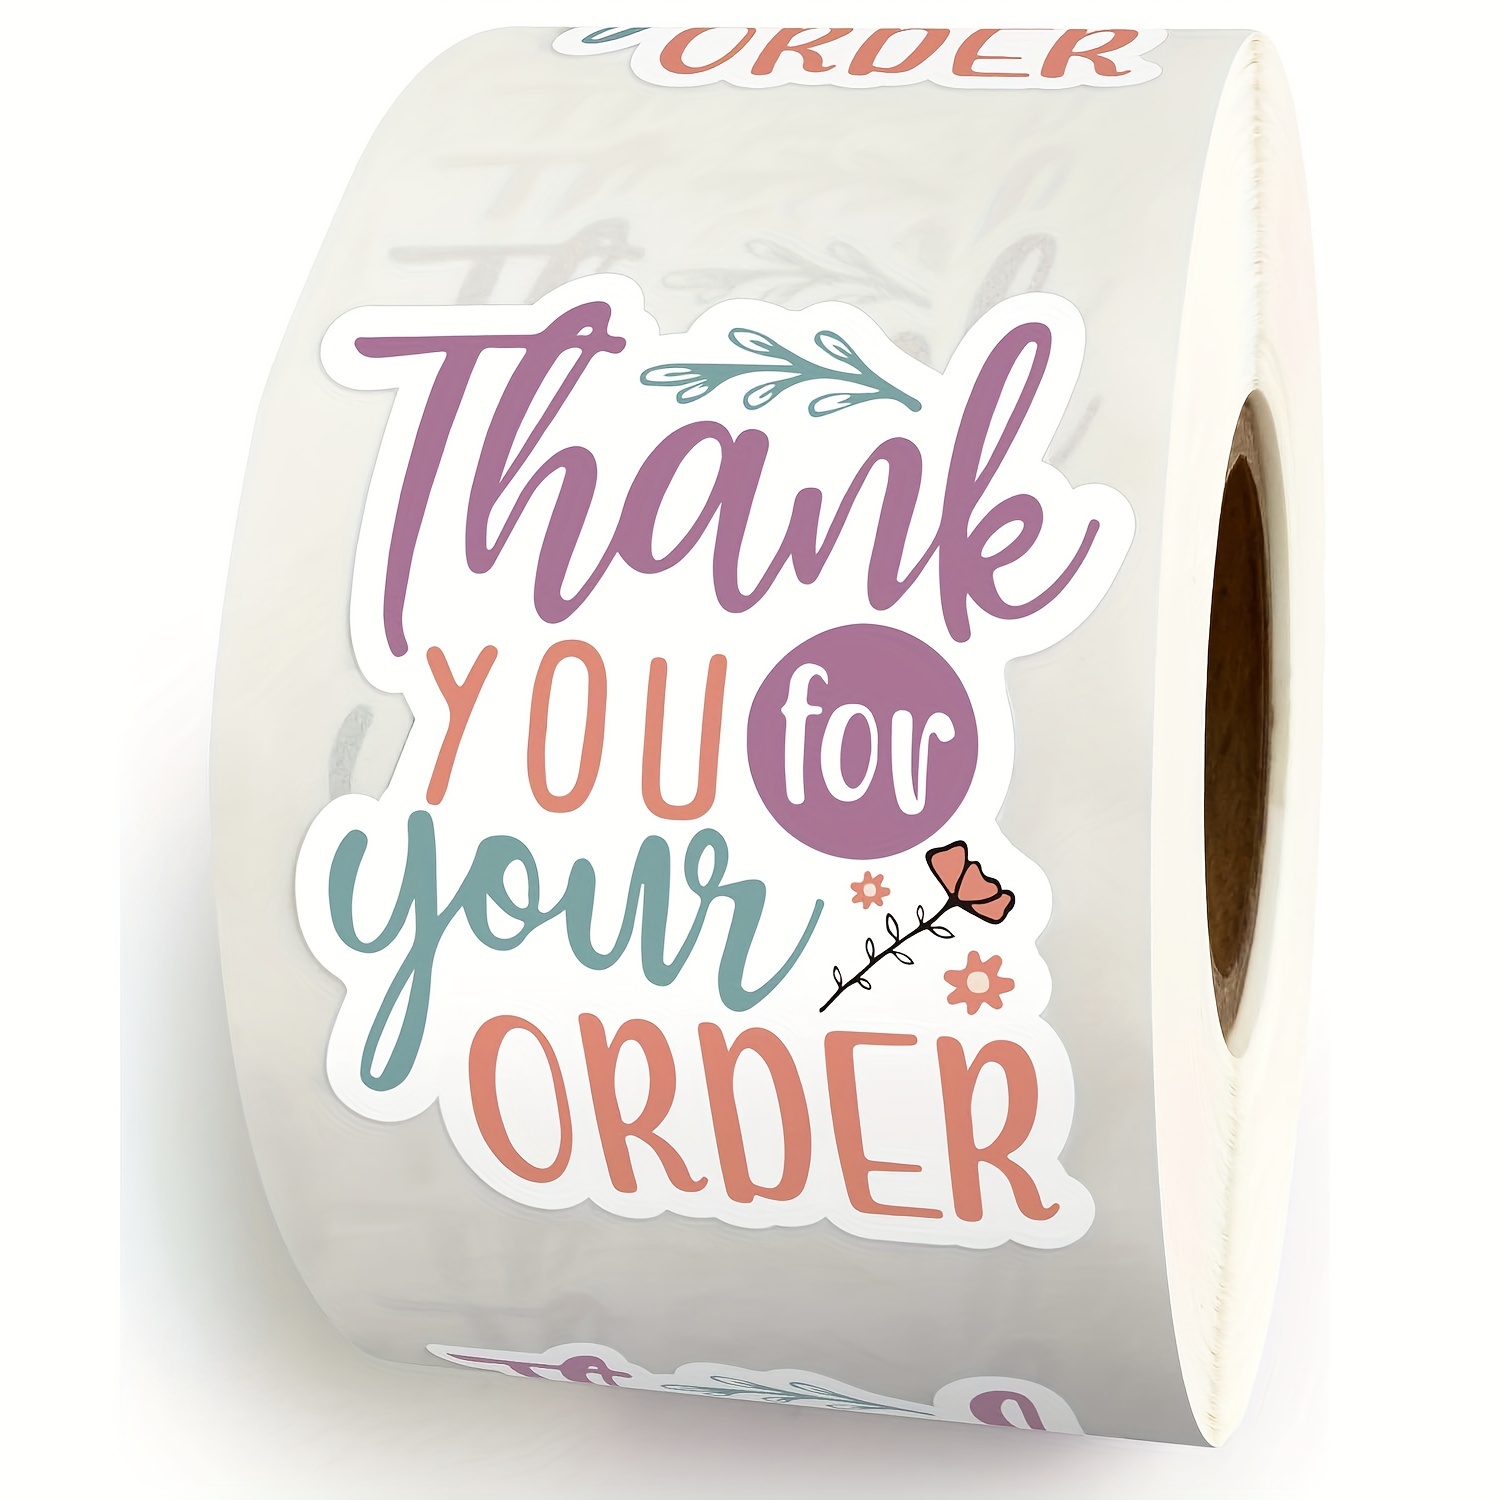 

500-piece Thank You For Your Order Stickers, Mixed Color Paper Gift Wrap Tags For Small Business, Handmade Labels For Baking Packaging, Envelope Sealing, Boutique Packing Bags.